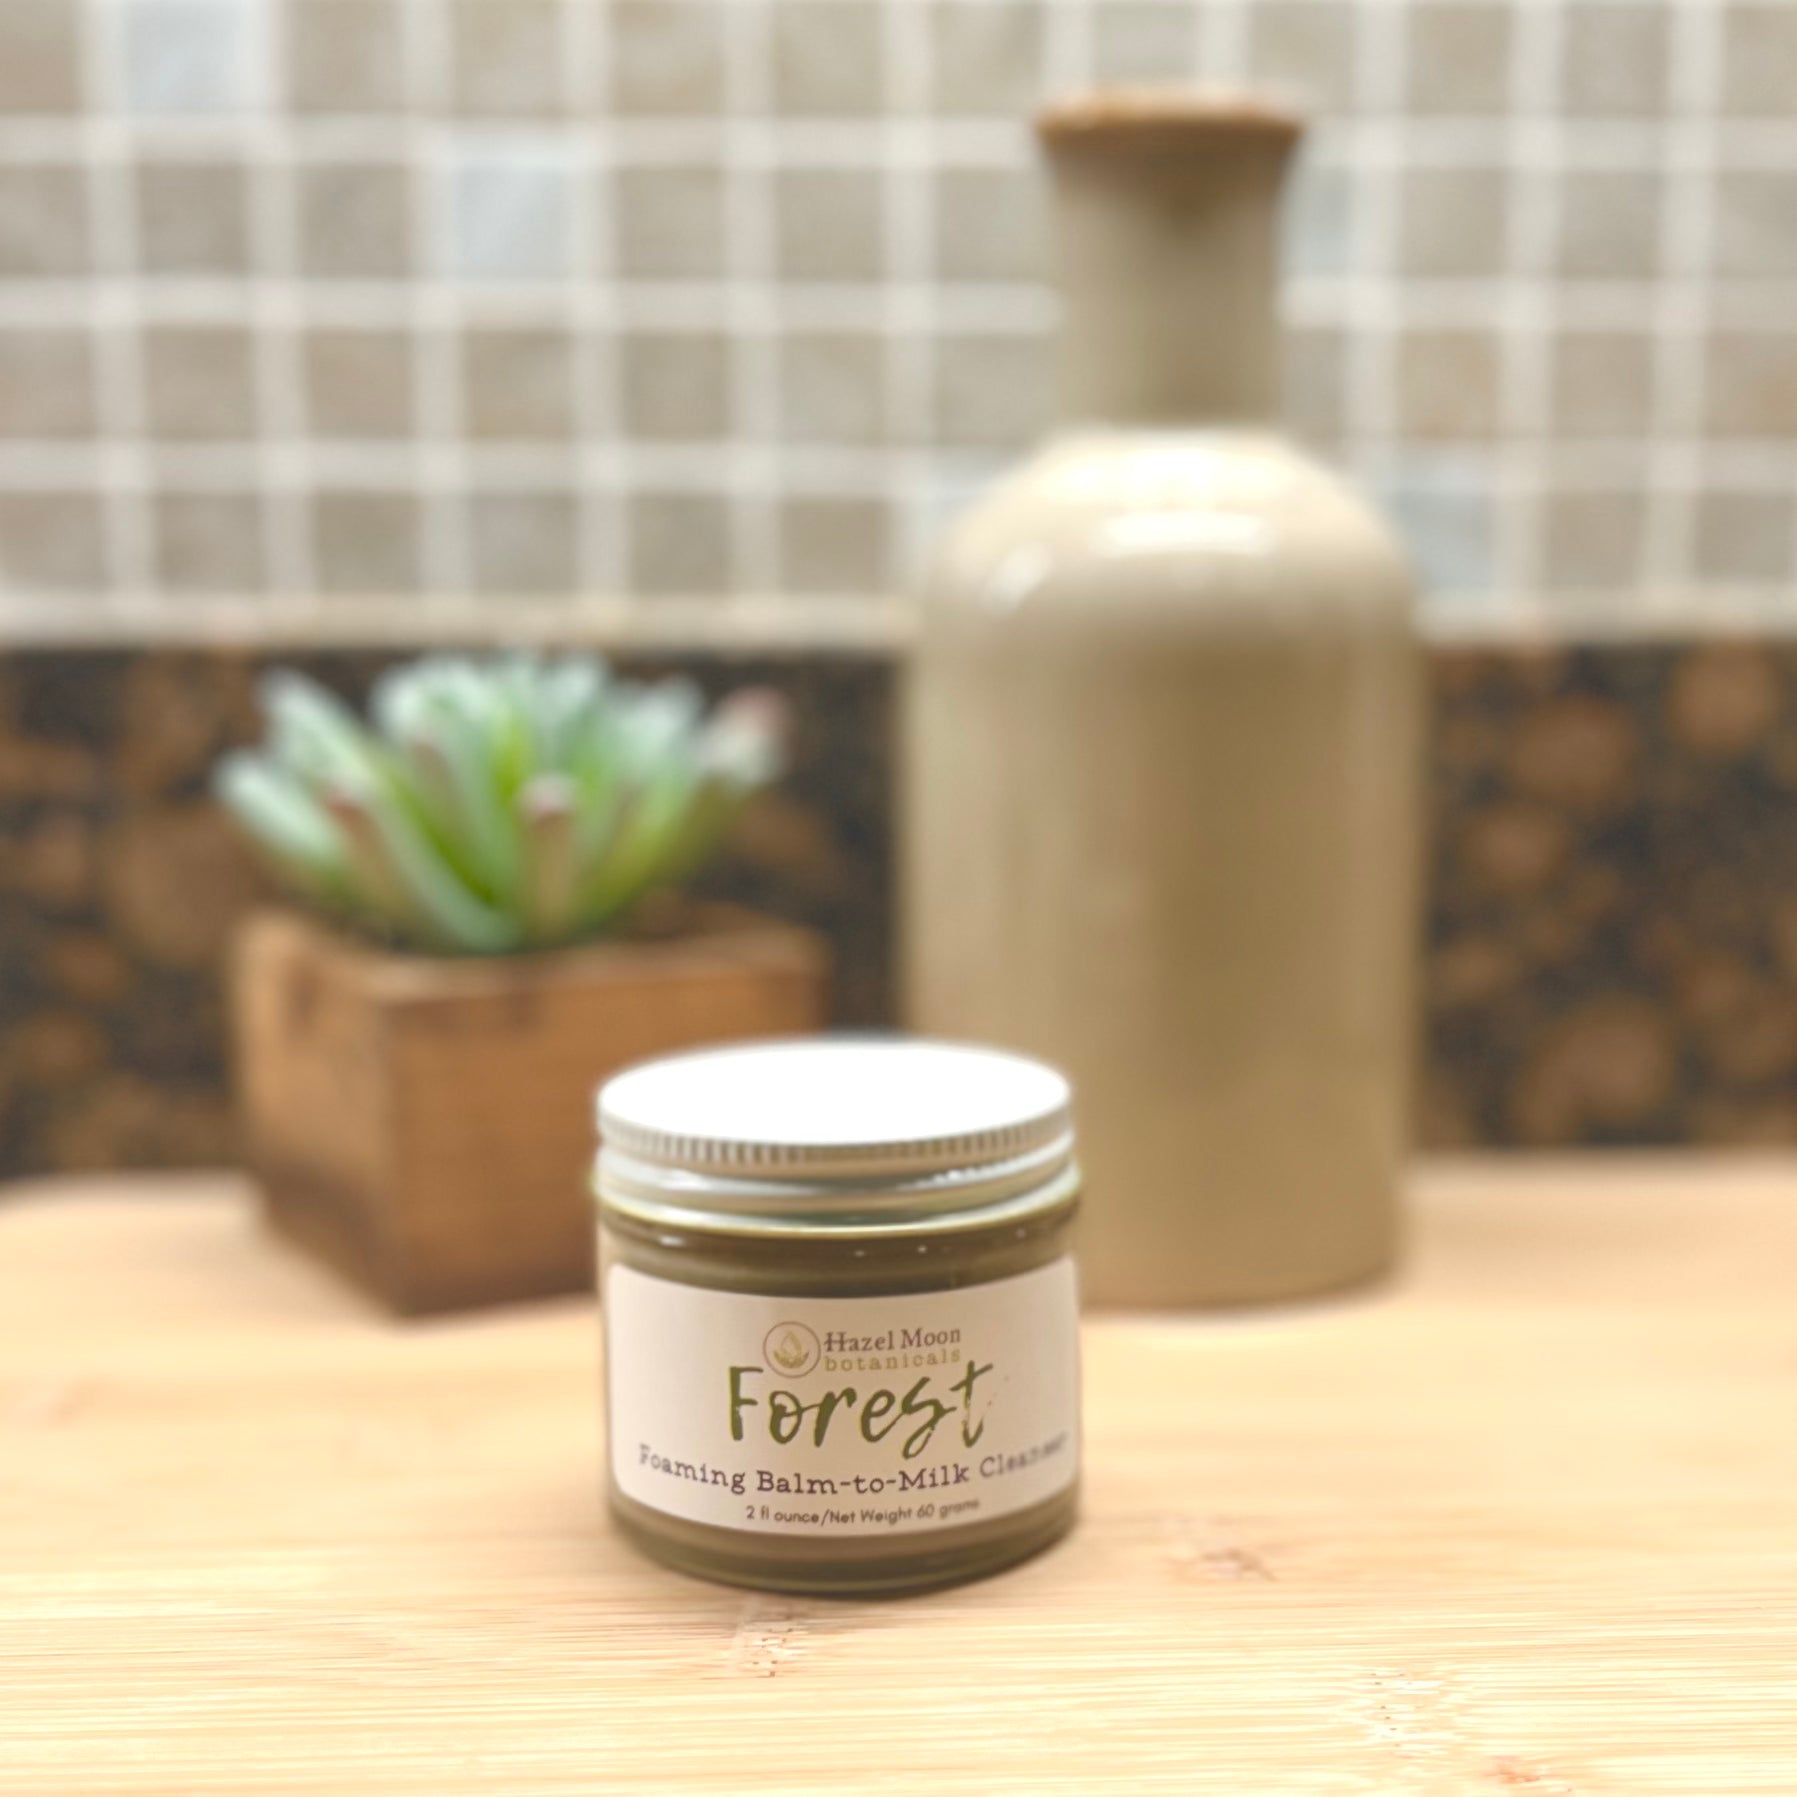 Forest Foaming Balm-to-Milk Cleanser